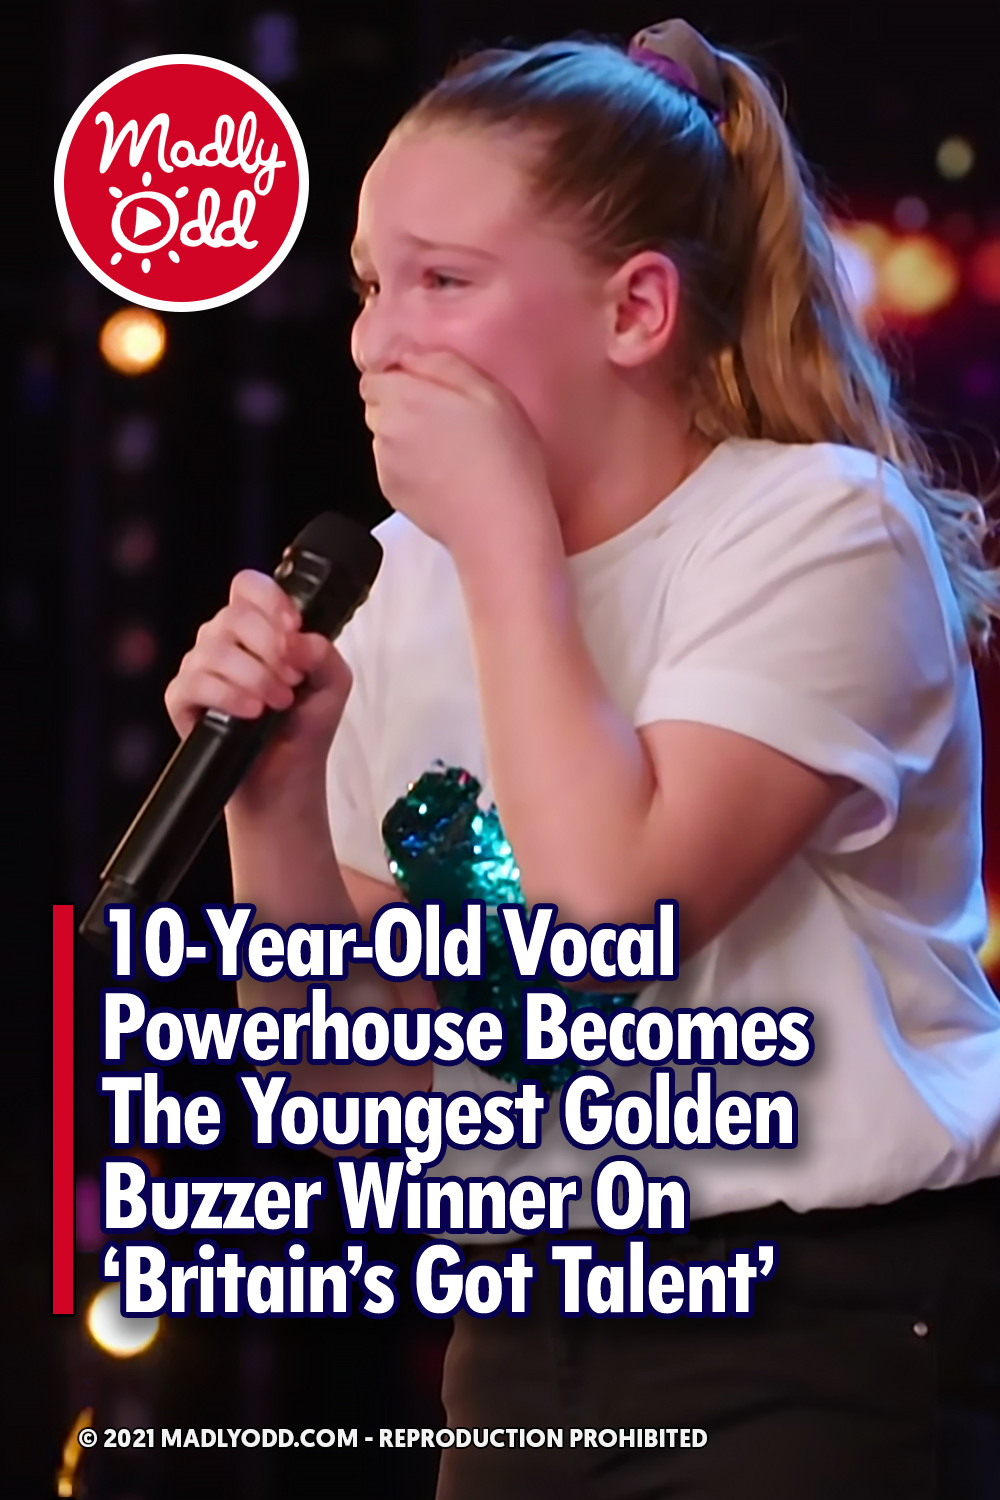 10-Year-Old Vocal Powerhouse Becomes The Youngest Golden Buzzer Winner On ‘Britain’s Got Talent’